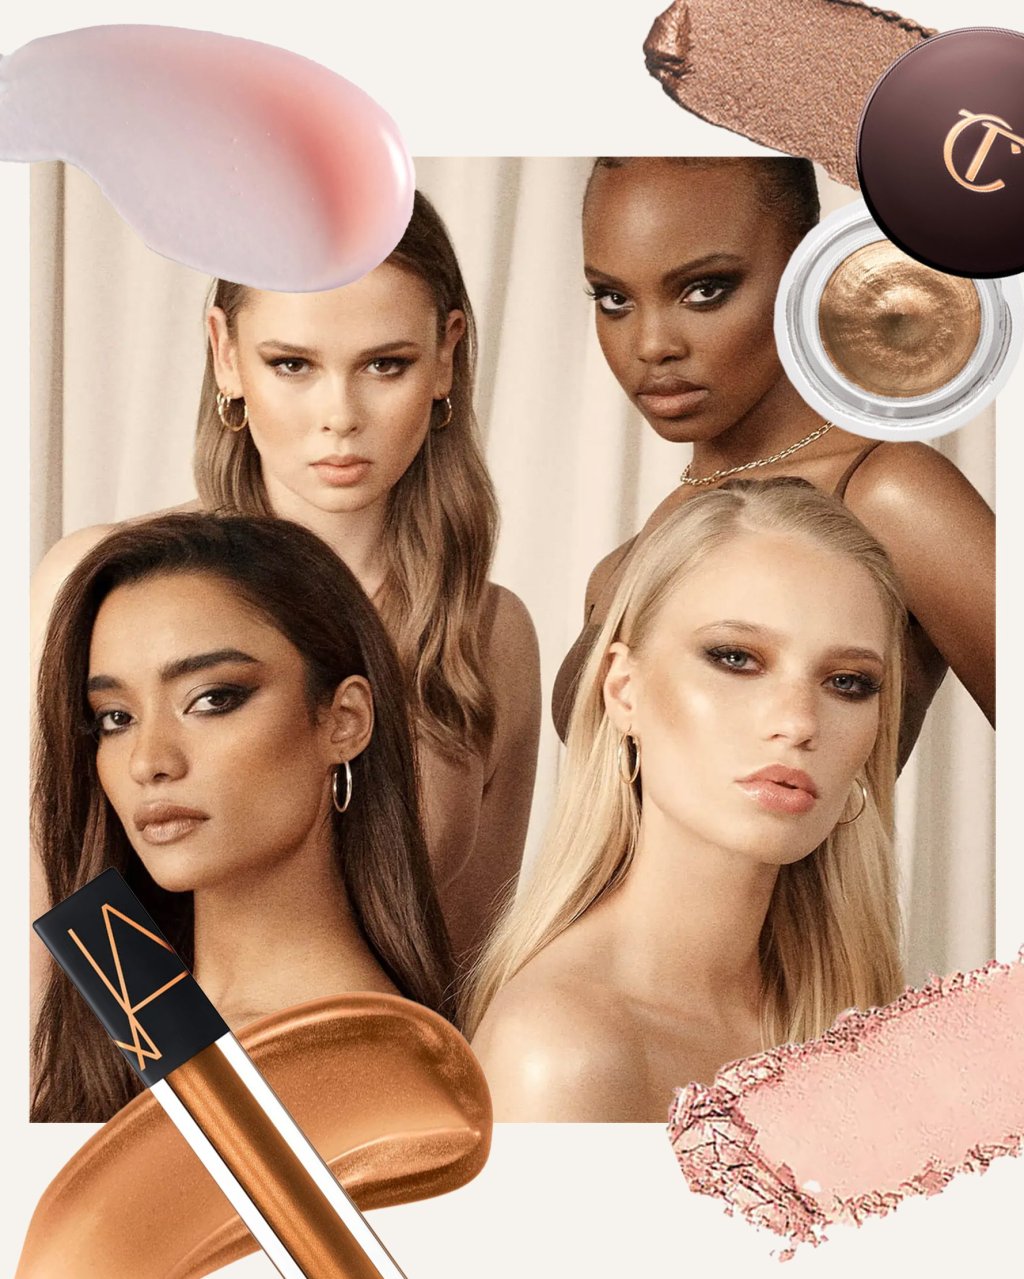 vagabond Fellow mesterværk Soft Glam Makeup Is The Beauty Look You Need To Know About